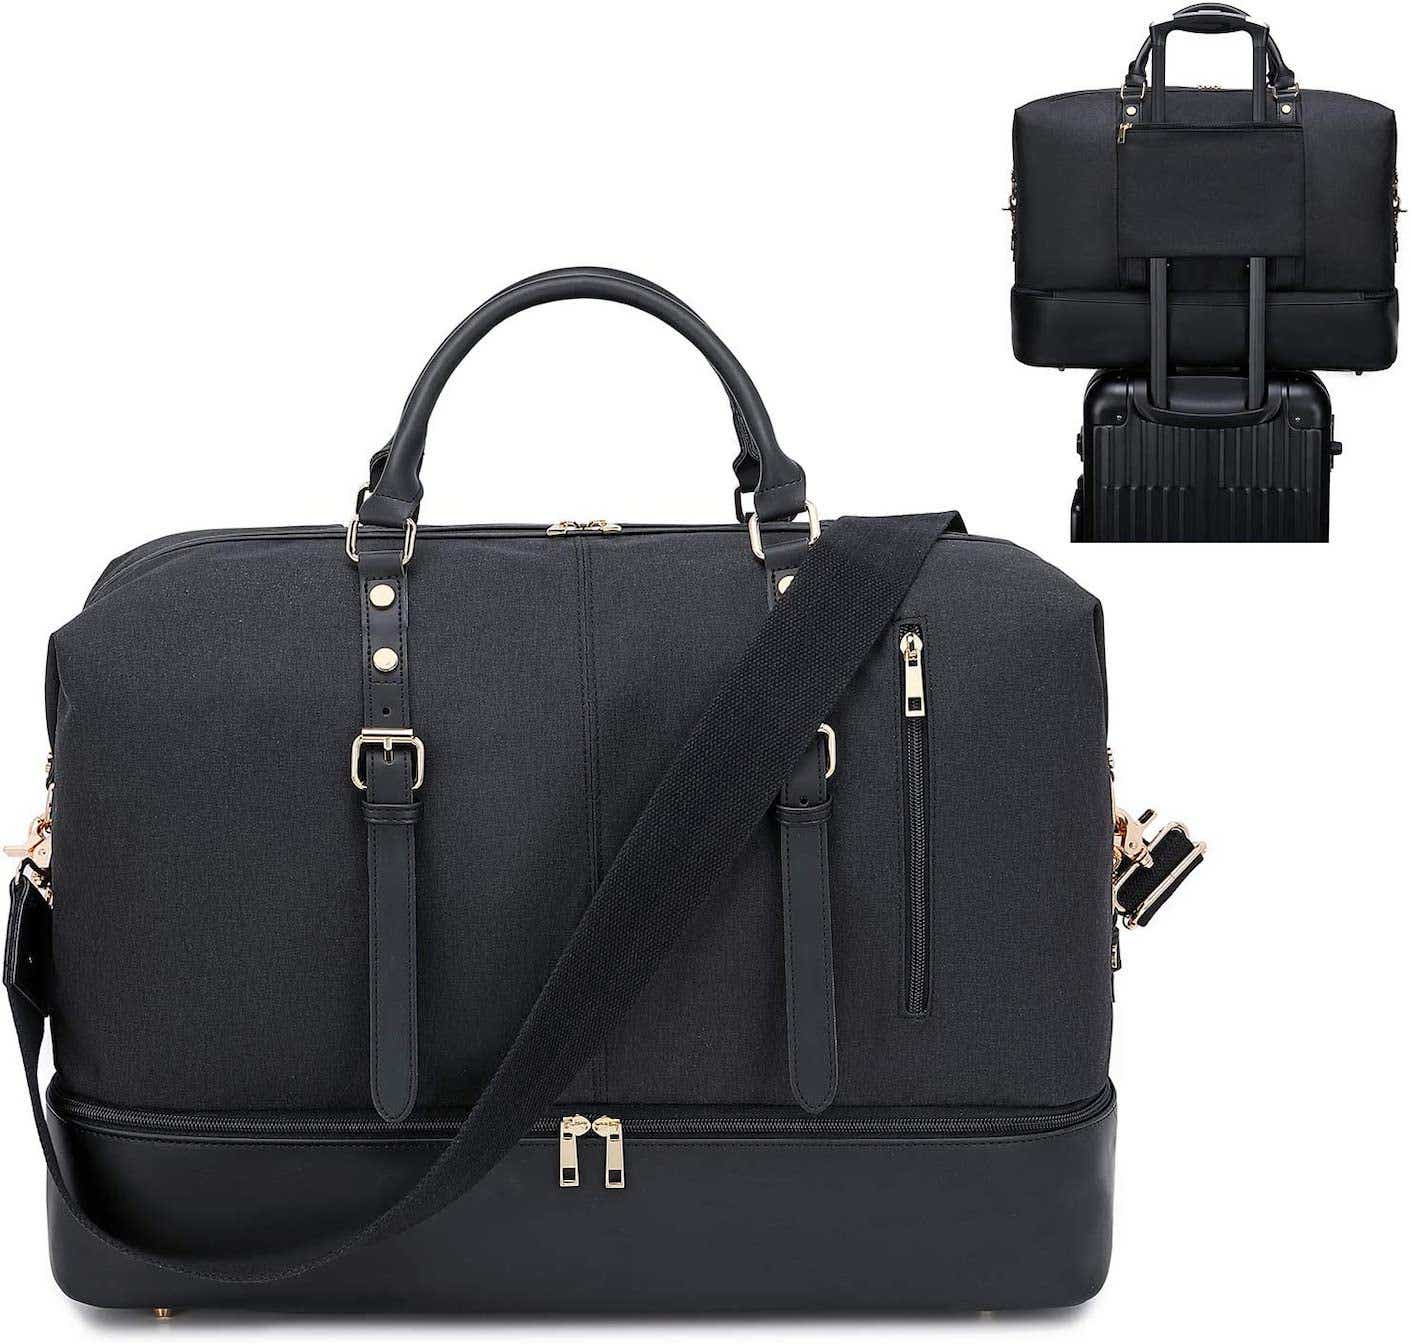 A black holdall with gold hardware, shown both closed and open against a white background.